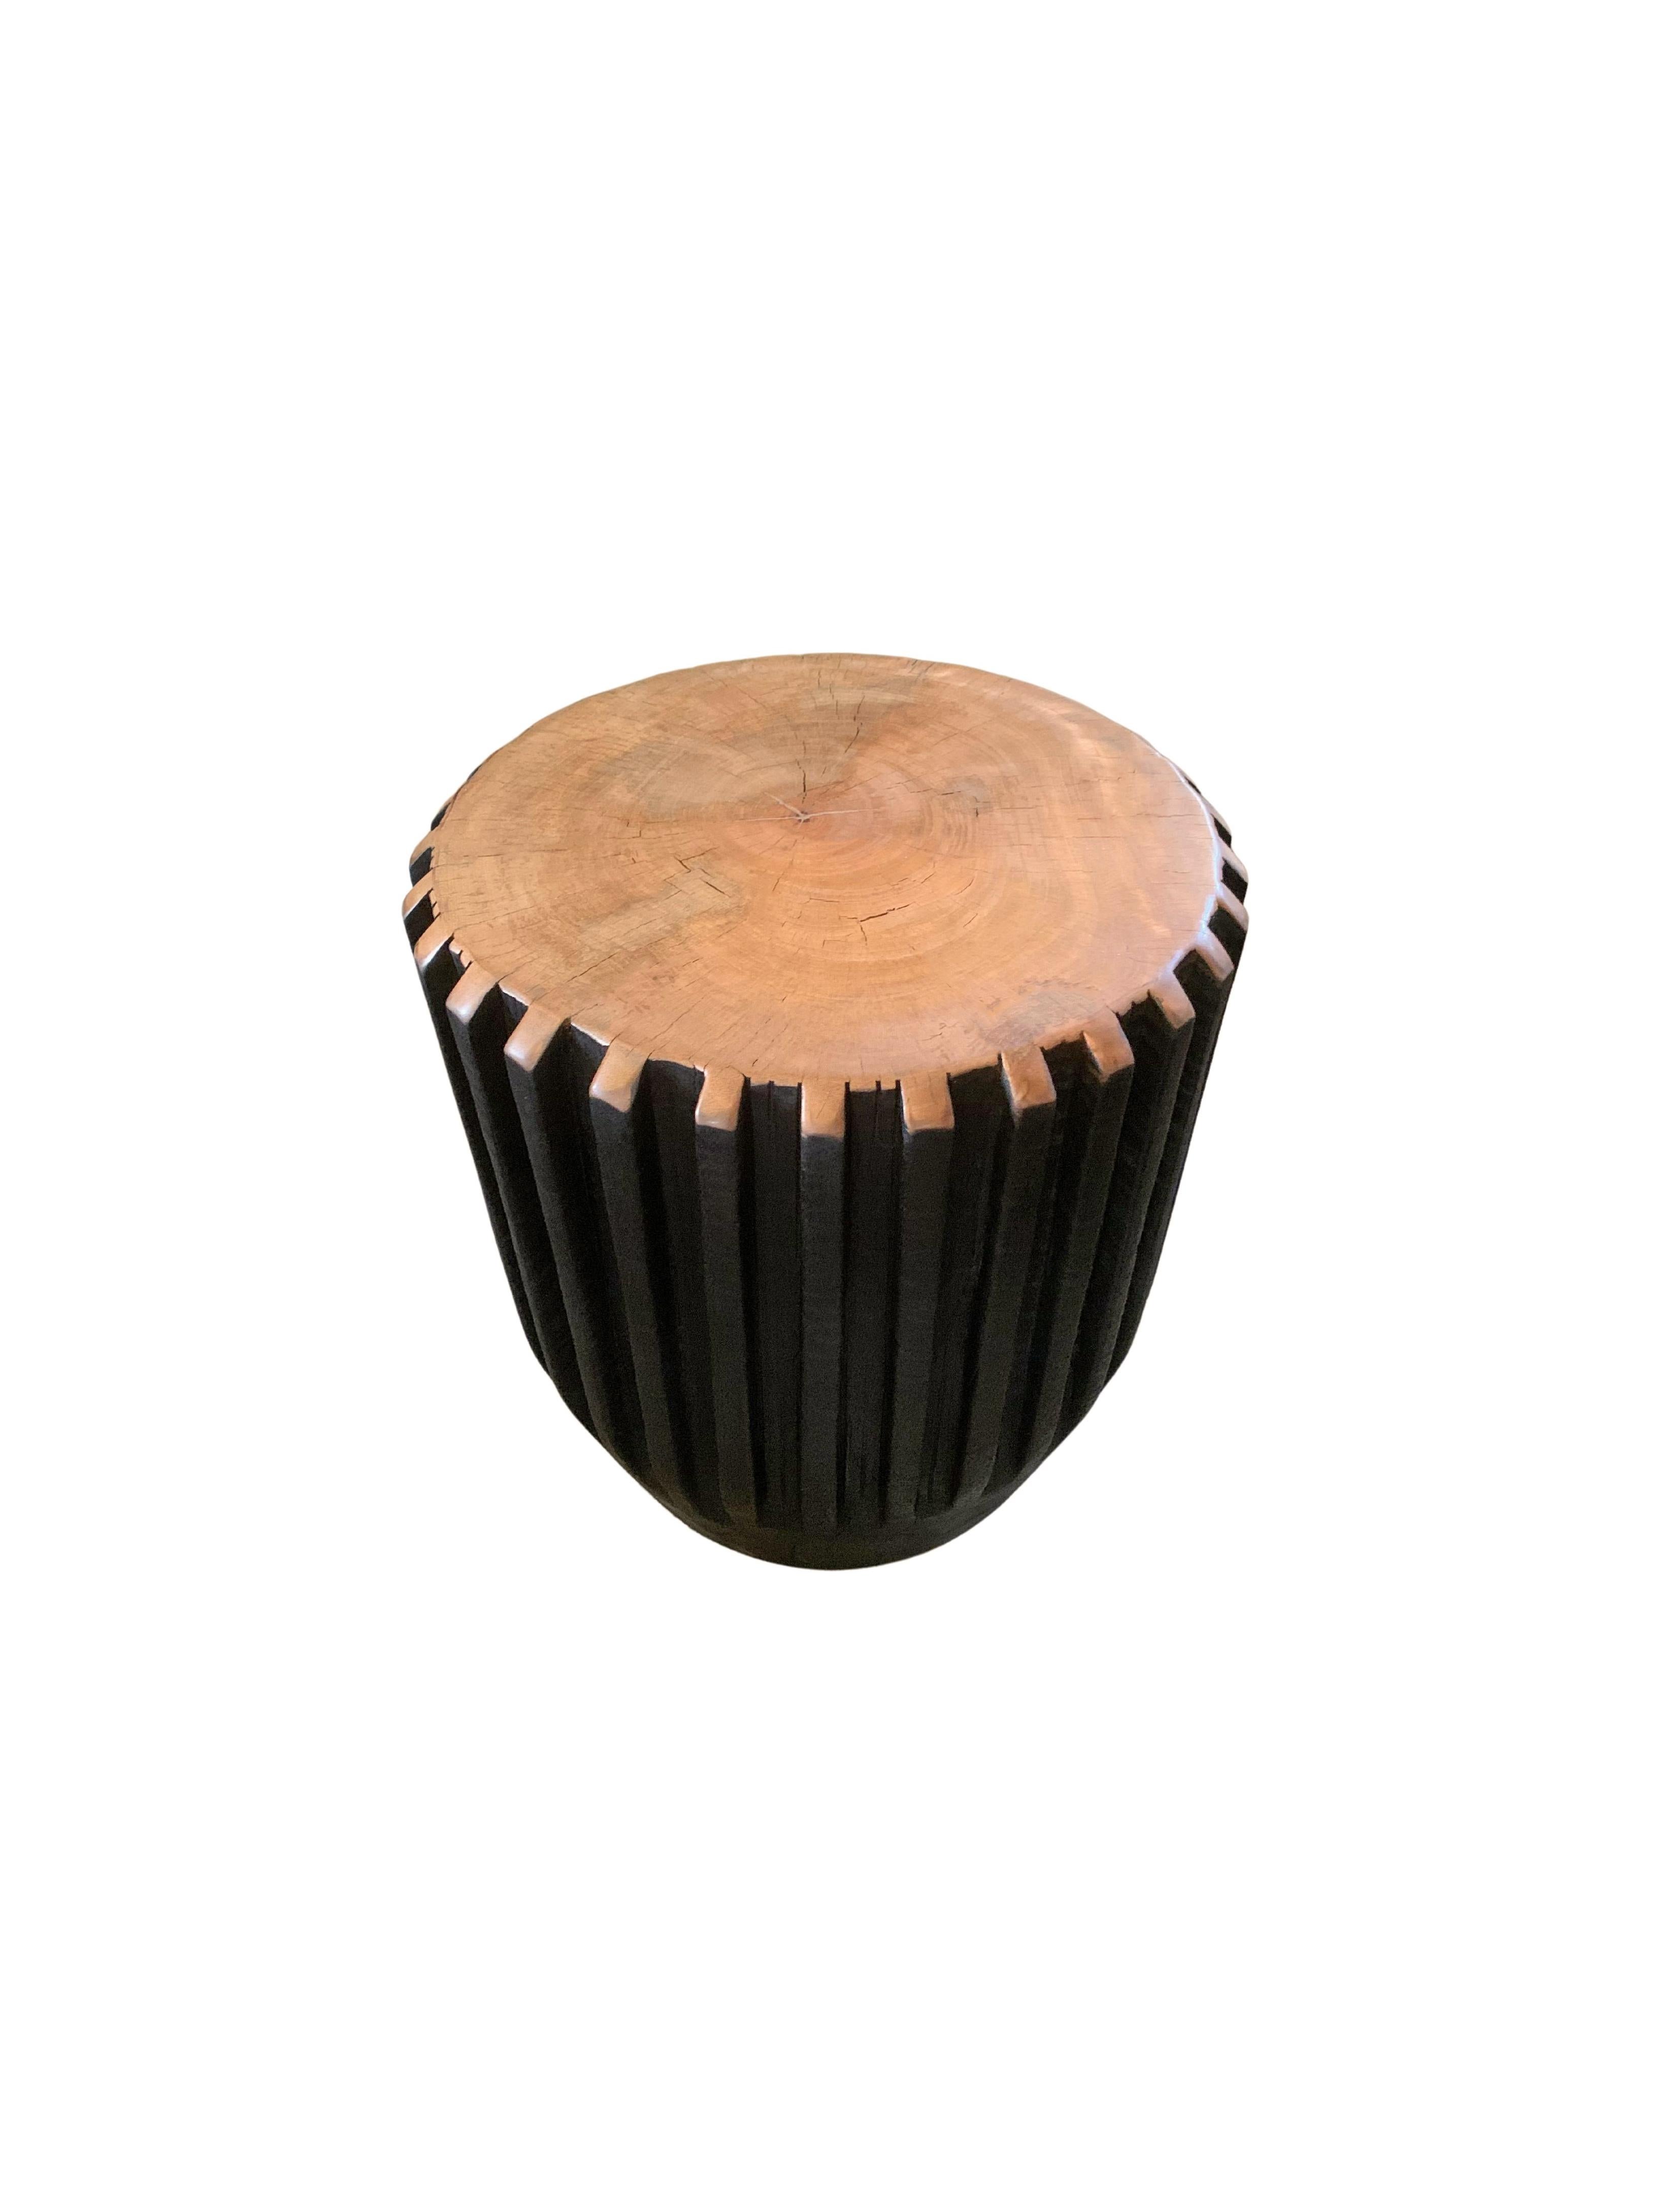 A wonderfully sculptural round side table with a hand-carved, ribbed design on its exterior. Its rich black pigment was achieved through burning the wood three times. Its top side does not possess a burnt finish but a natural polished finished